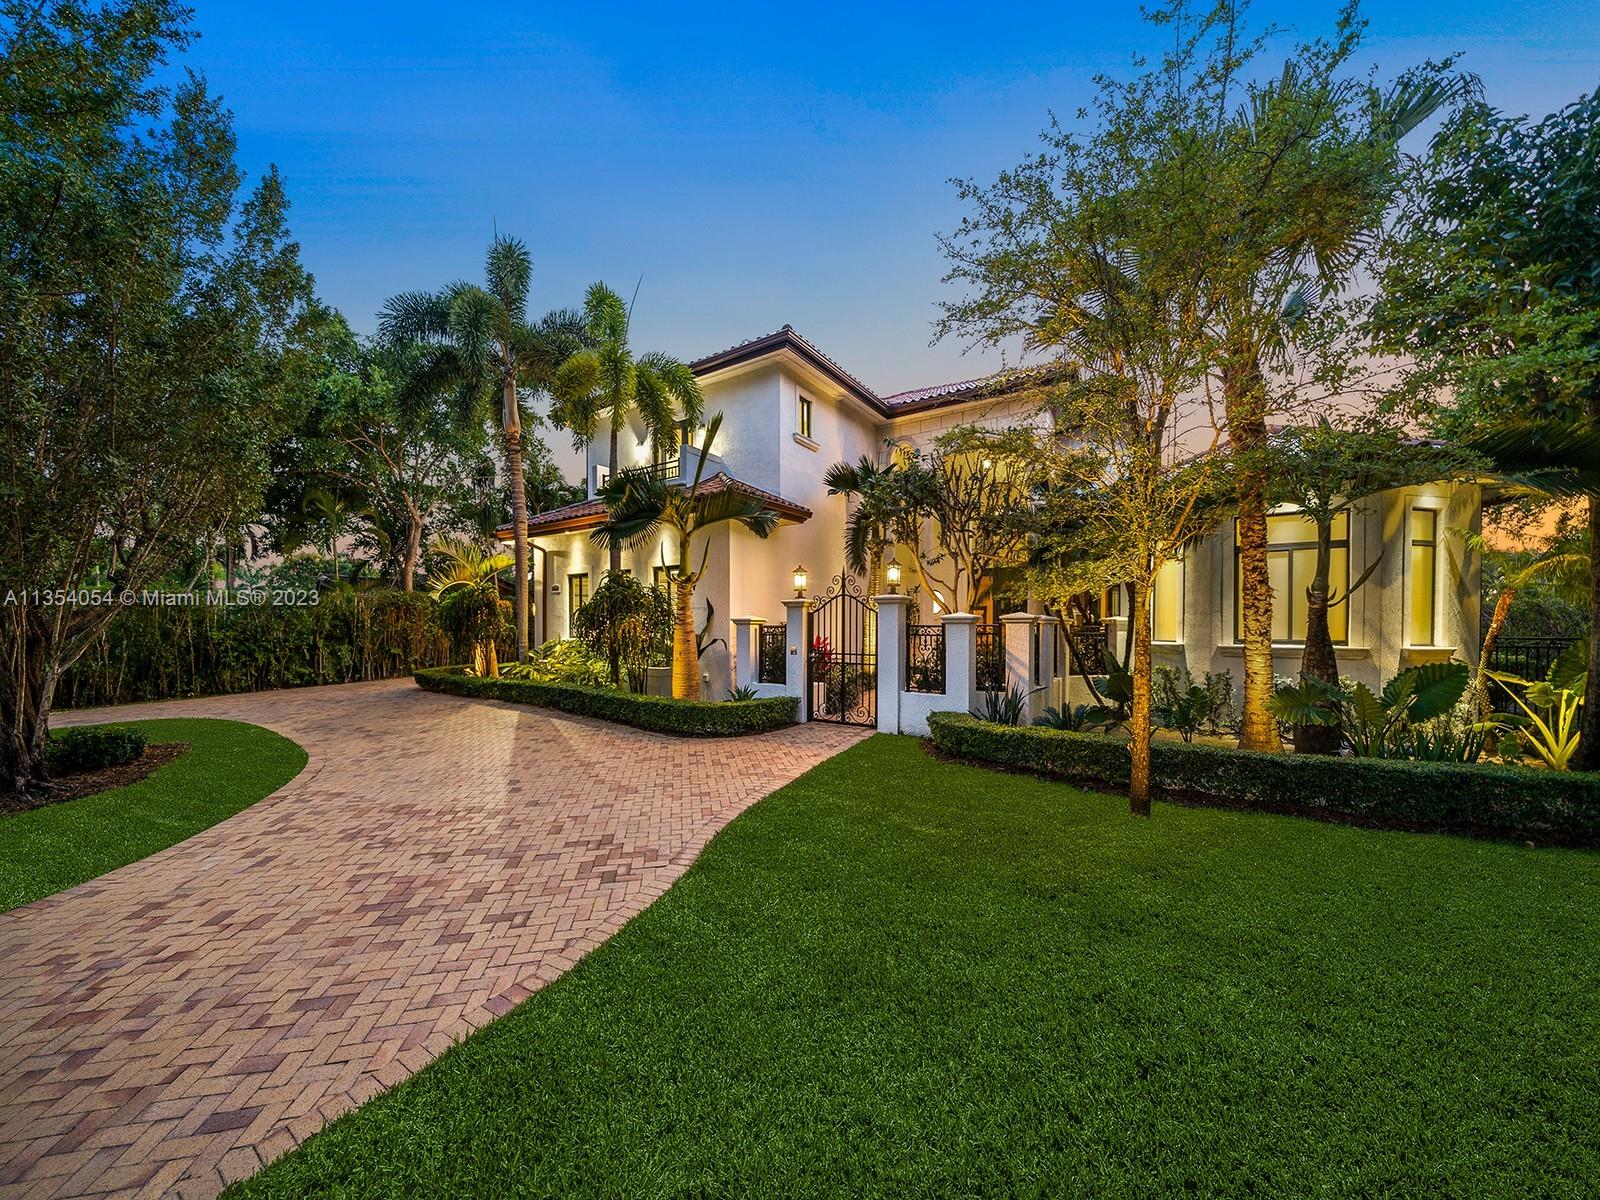 This Magnificent two-story estate in N Pinecrest welcomes you w/lush landscaping & a private gate entrance w/ charming courtyd that sets the tone for this exceptional property. Upon entering, you'll be awed by the soaring ceilings, grand foyer, & sweeping formal living rm. Spacious gourmet kitchen elegantly overlooks the expansive family rm, accentuated by its double height ceilings, complete w/top-of-the-line Viking/SubZero appl & a walk-in pantry. Expansive living areas create the perfect space for entertaining guests, w/ a home office & a second family rm upstairs w/wet bar. The primary suite is a true sanctuary w/spa-like bath, sitting area & access to backyd. Discover outdr living w/covered terraces, large pool, spa & ample grounds. Add’l features: imp win/drs, generator & 3-car gar.